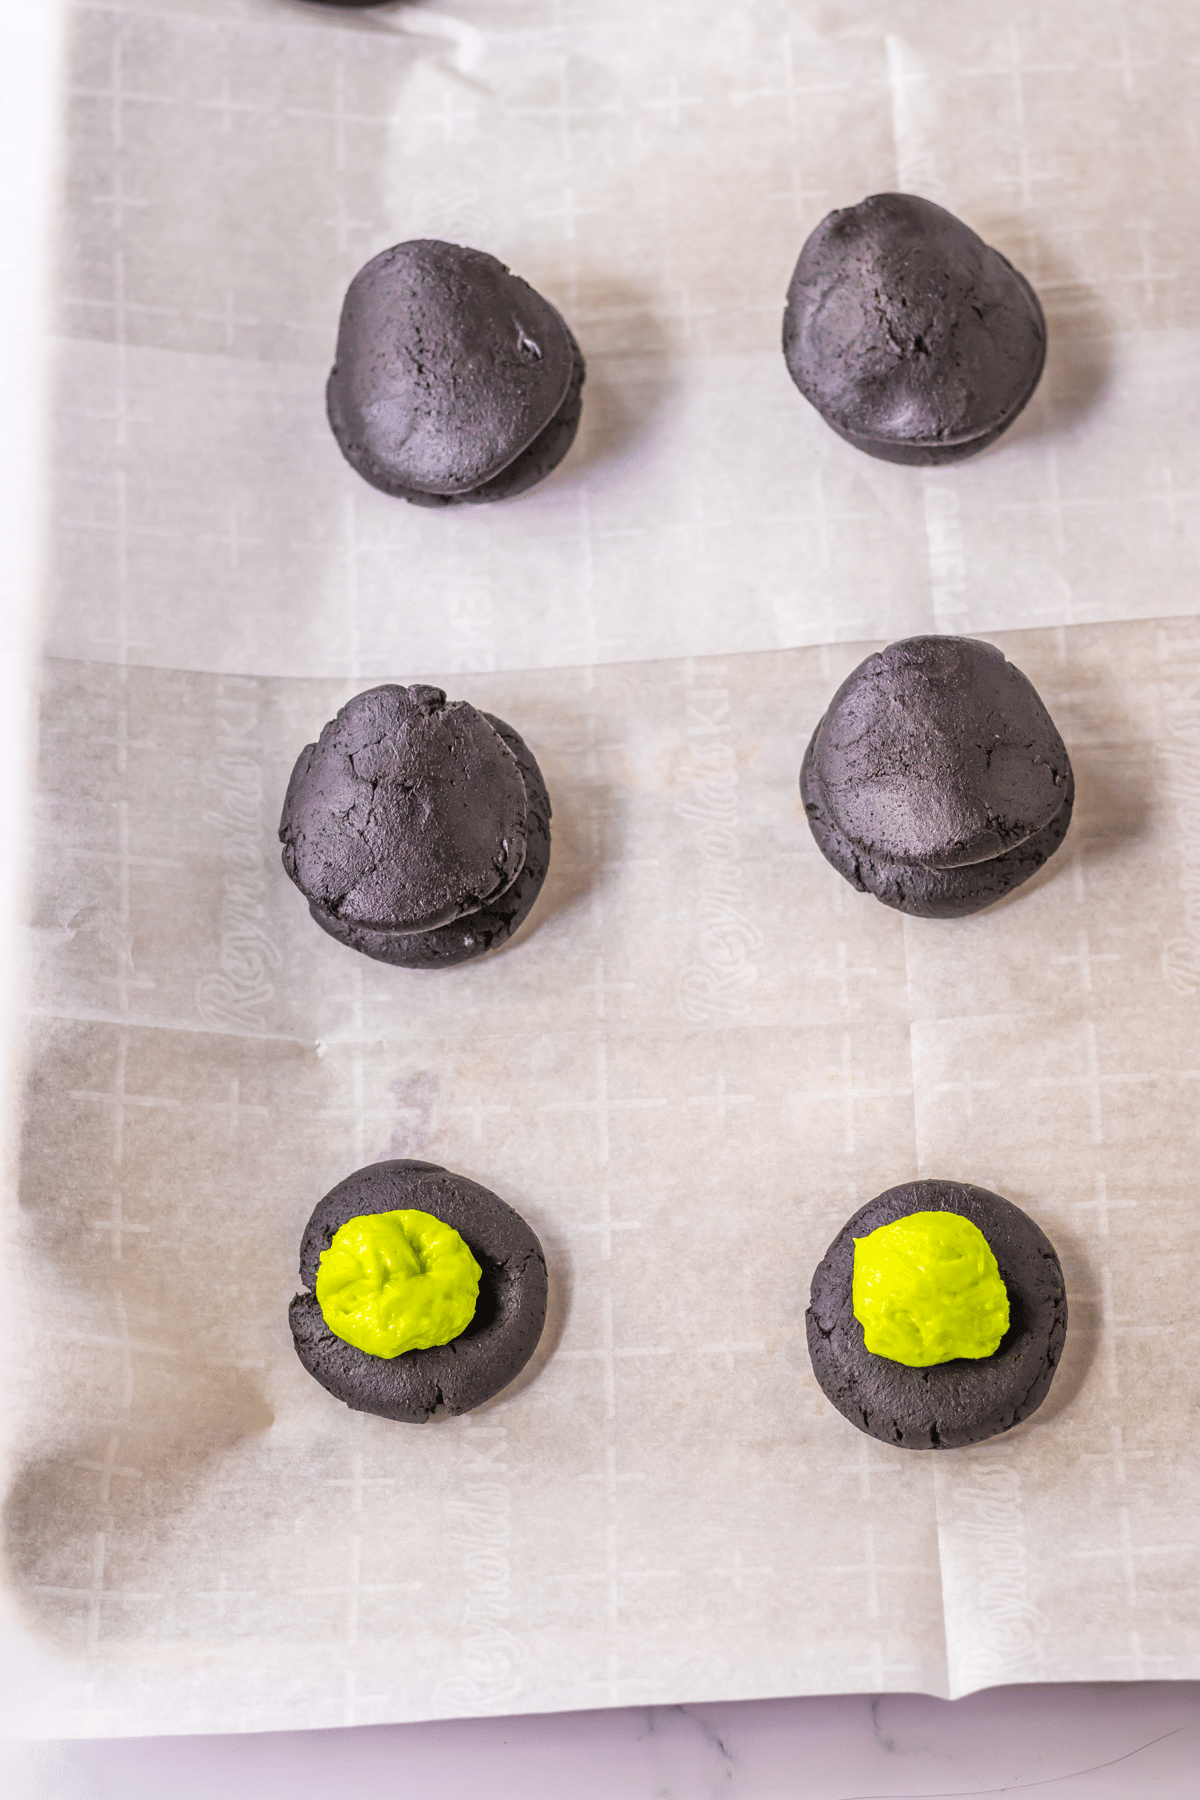 Another process in making Halloween Black Velvet Cookies is to scoop the mixture and form it into balls. Place them on parchment.